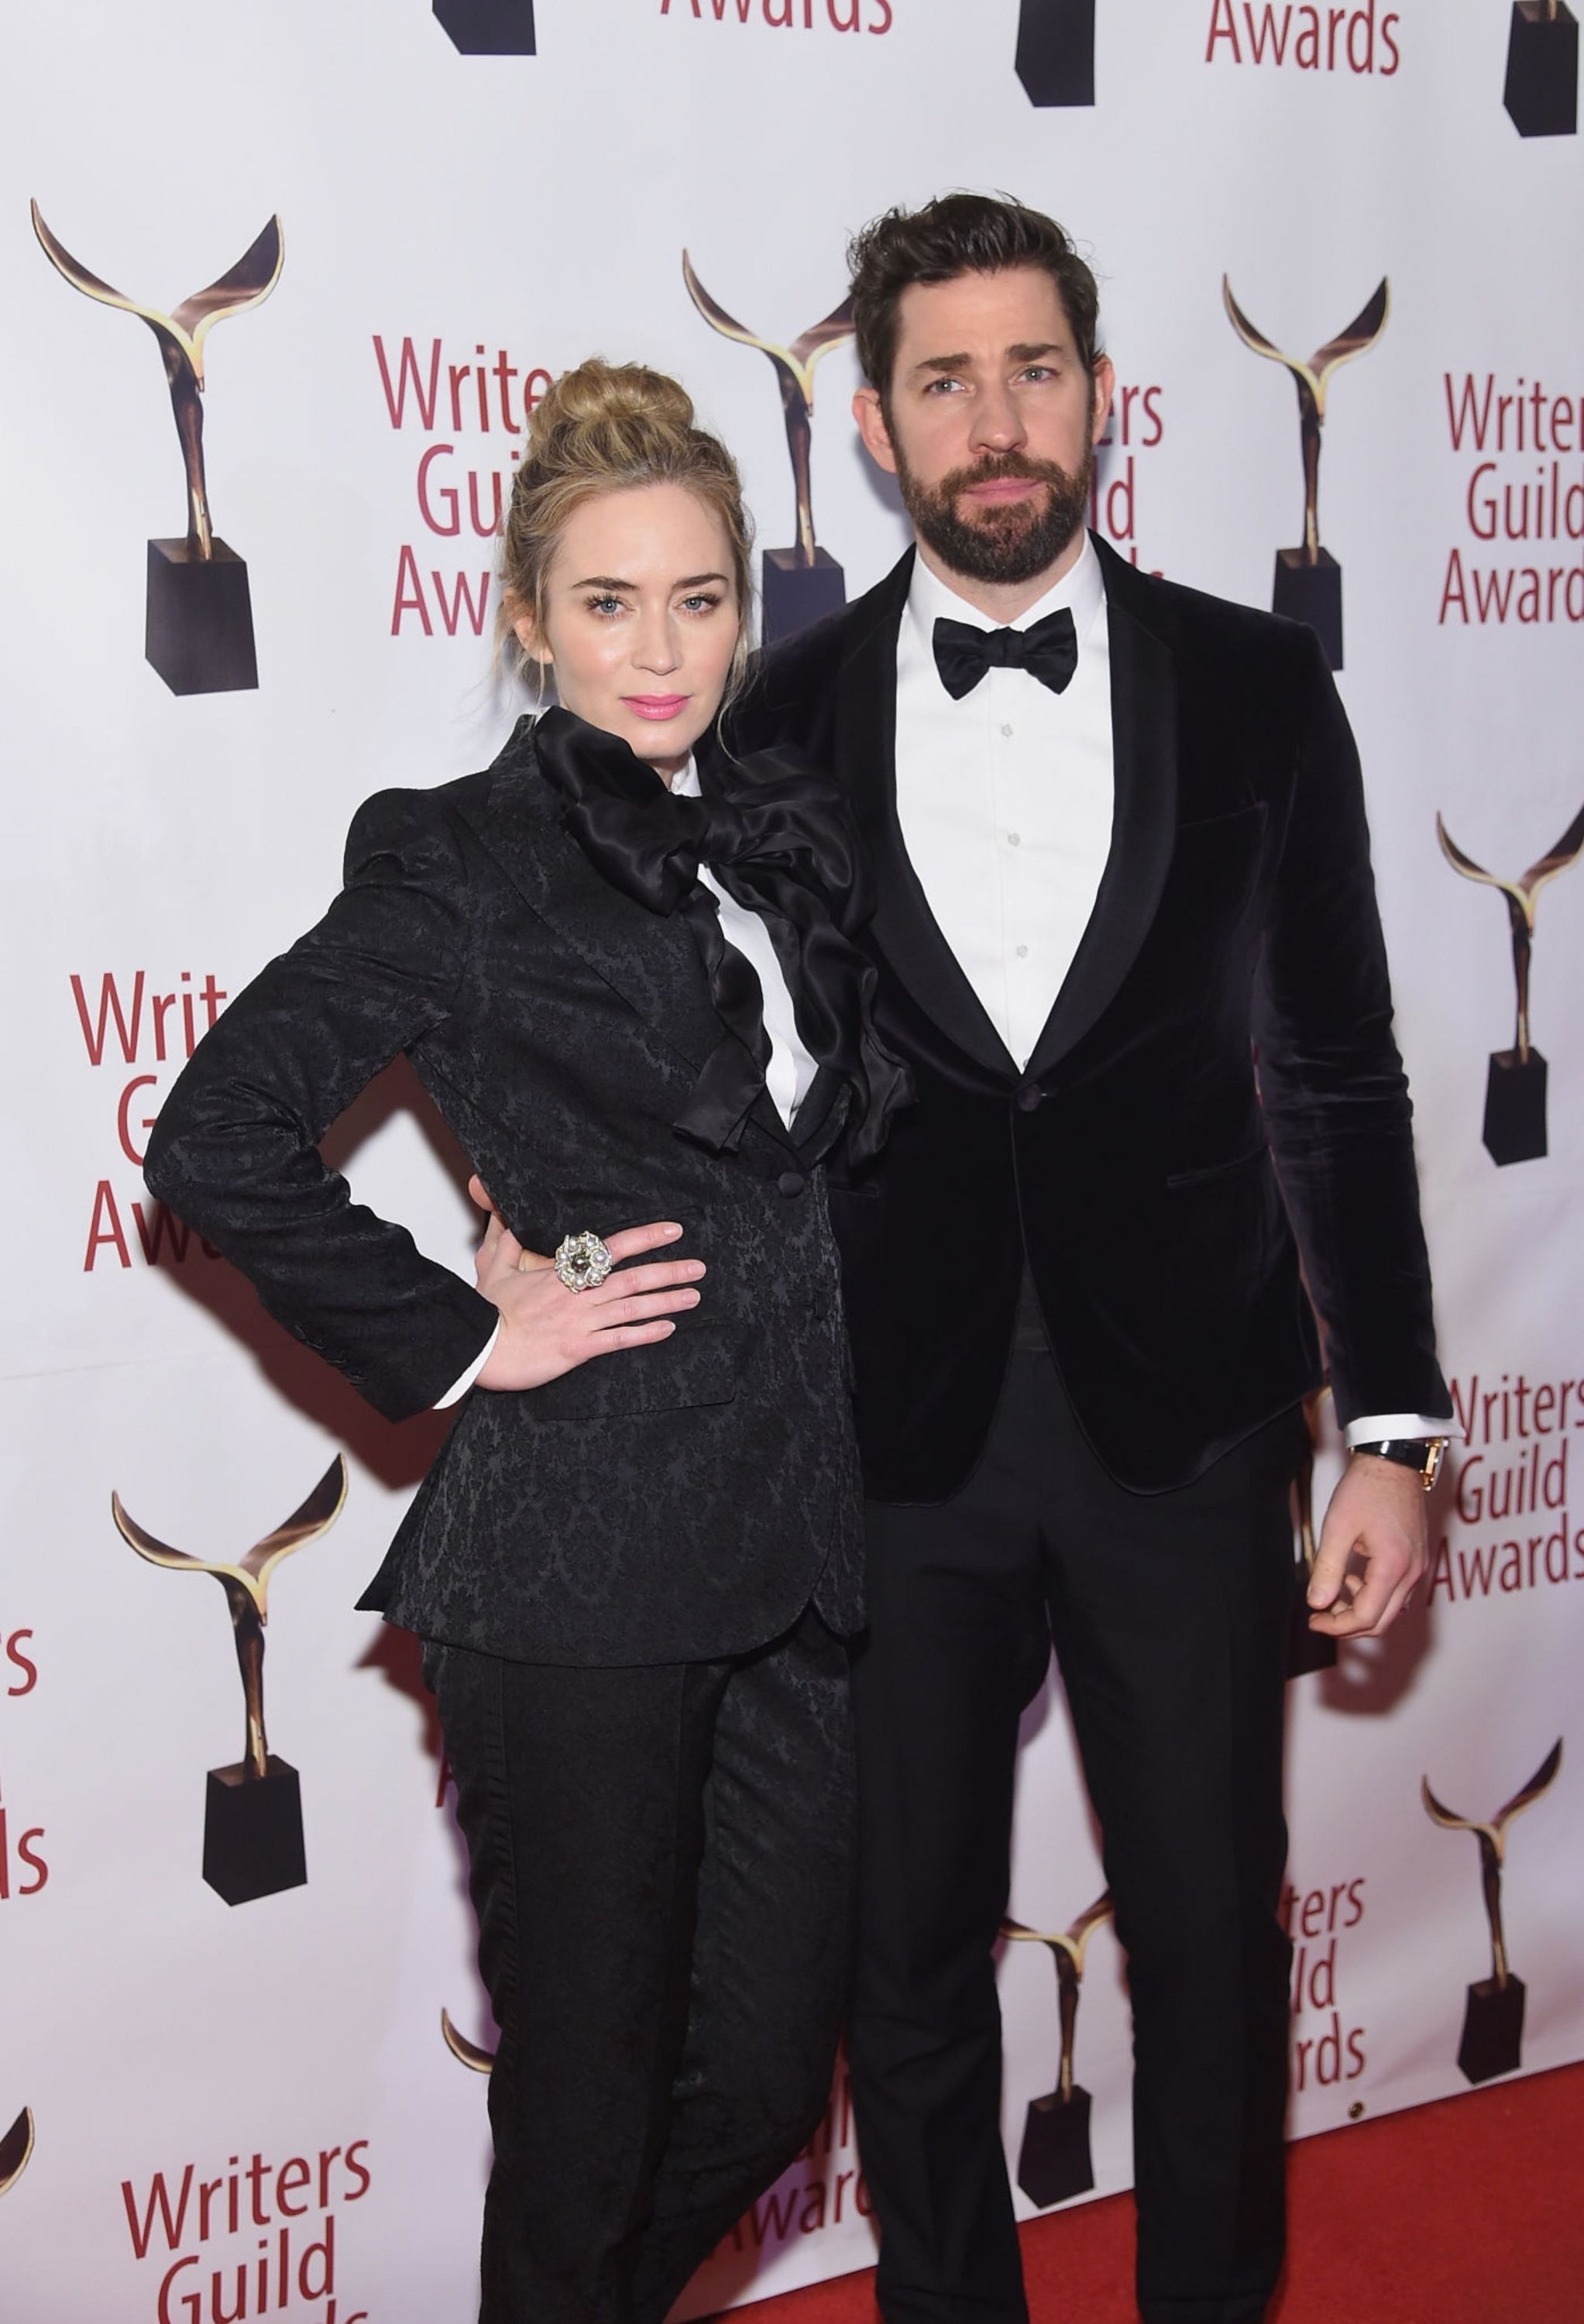 2019-02-17-71st-Annual-Writers-Guild-Awards-011.jpg